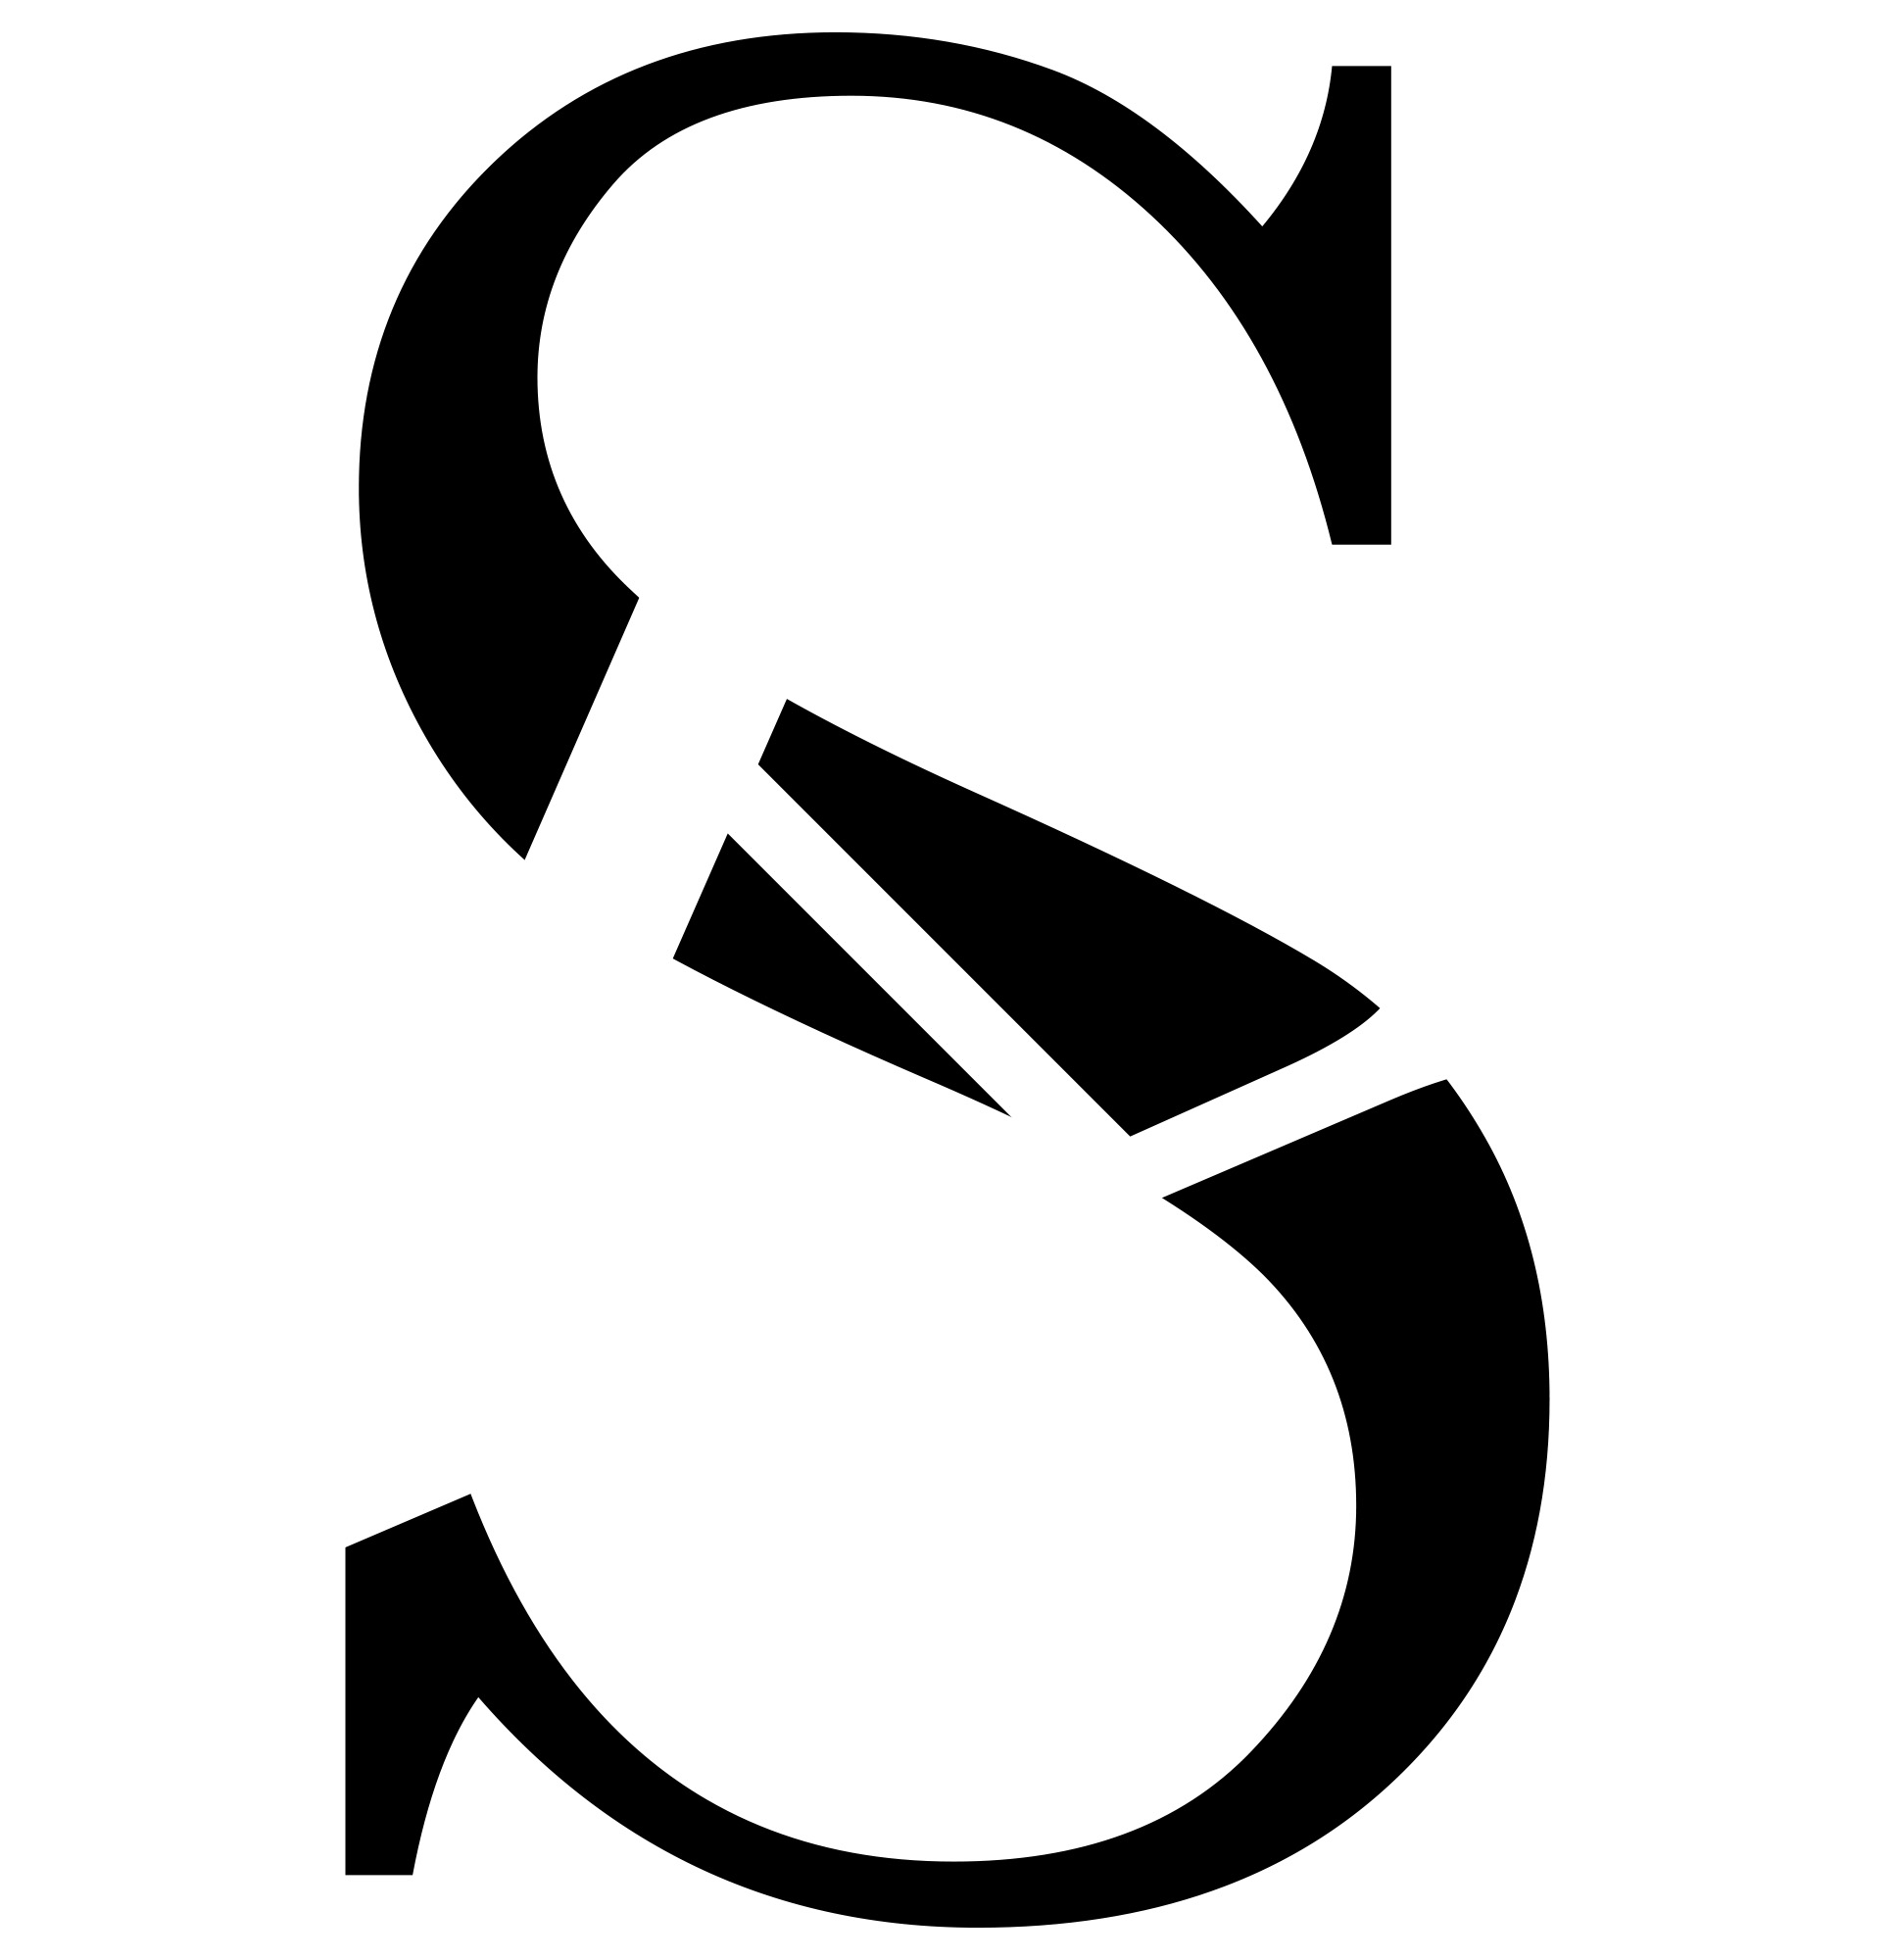 S Letter Designs | Free download on ClipArtMag